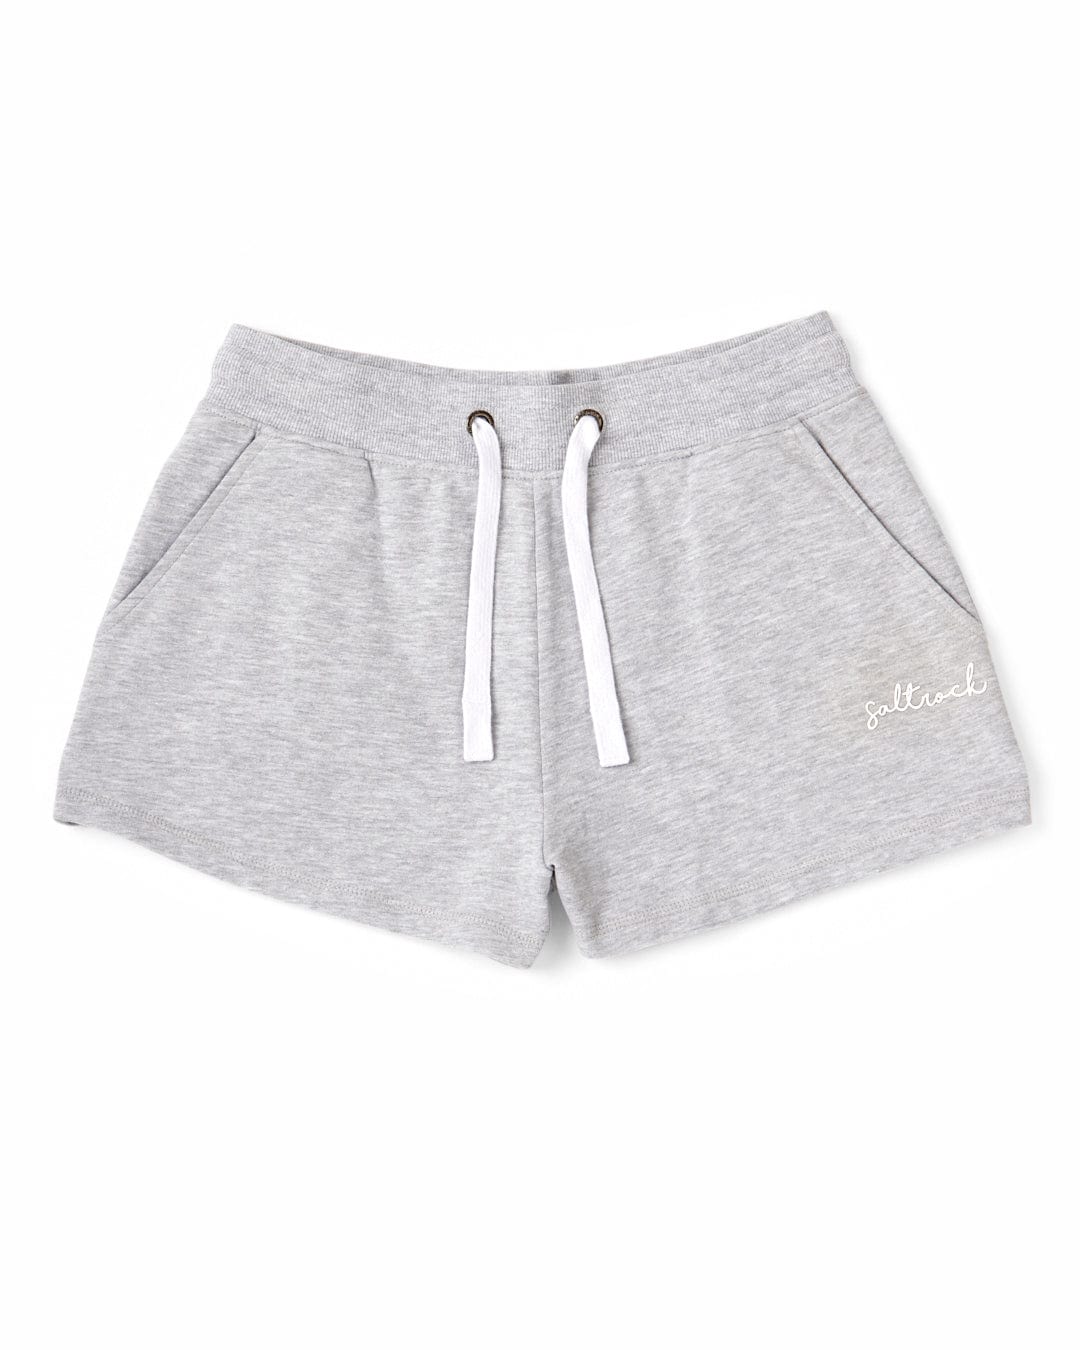 A girl's Velator - Womens Sweat Short - Grey with a white Saltrock branding logo, made from soft jersey material.